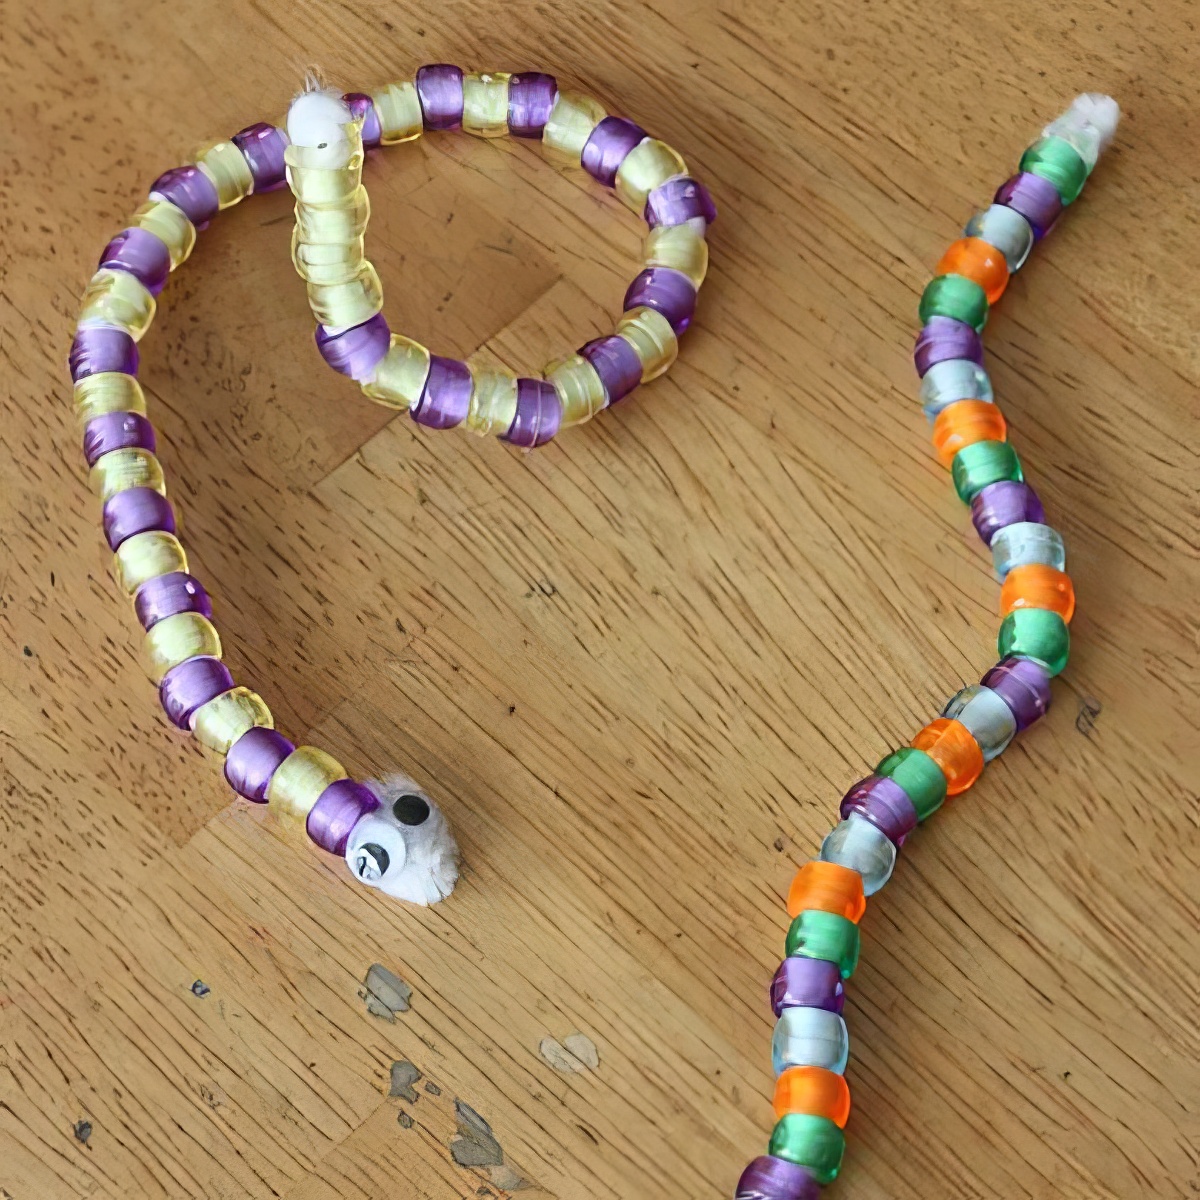 snake craft using diy pipe cleaners and beads